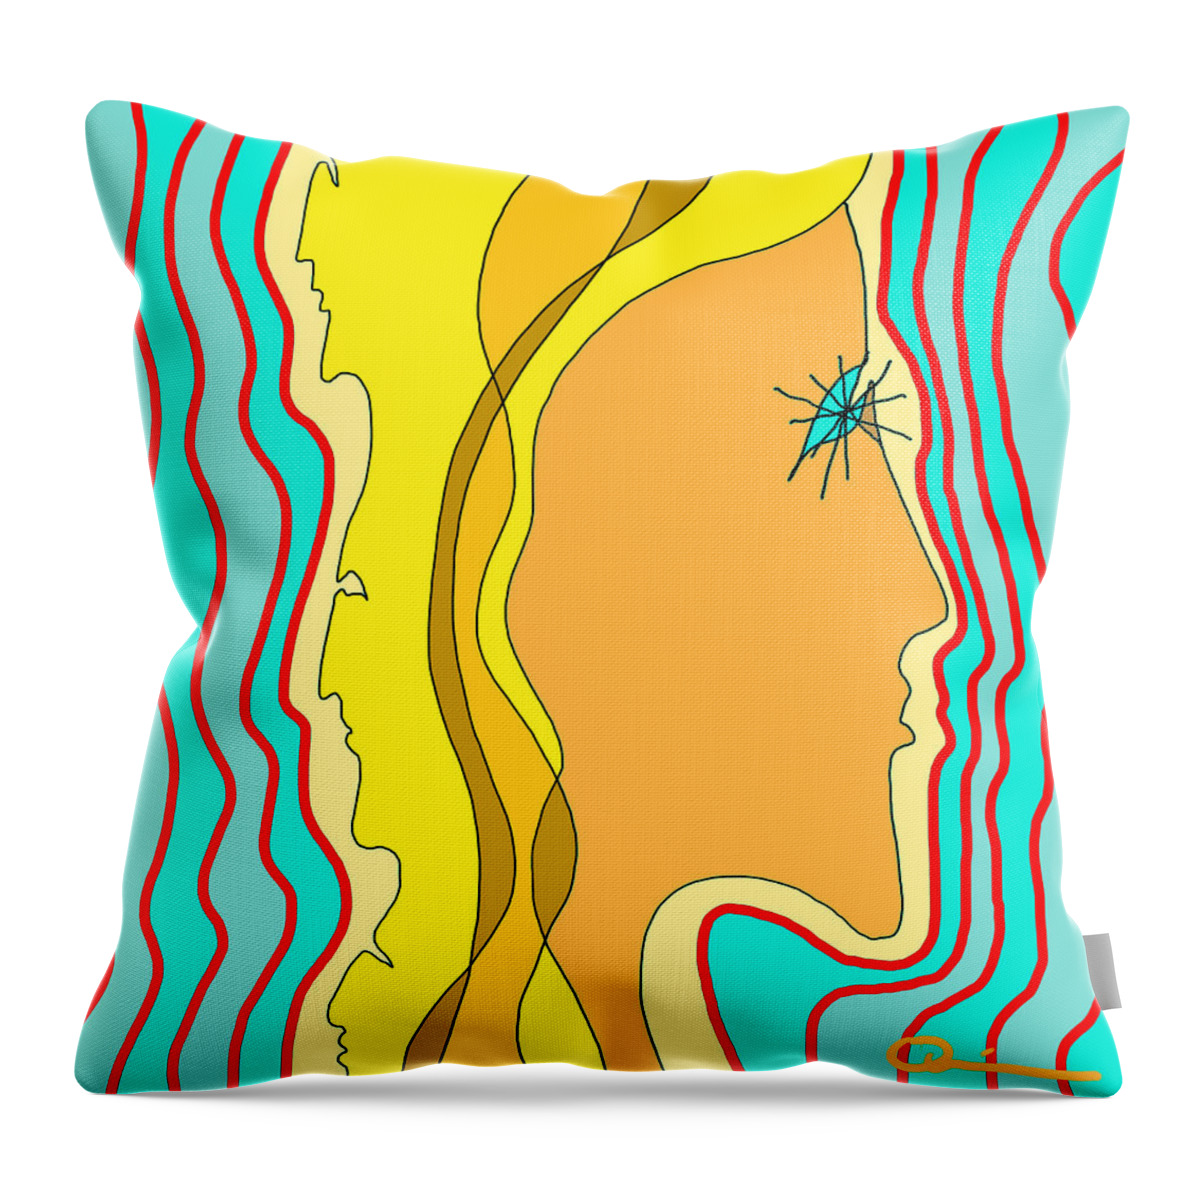 Quiros Throw Pillow featuring the digital art Water World by Jeffrey Quiros